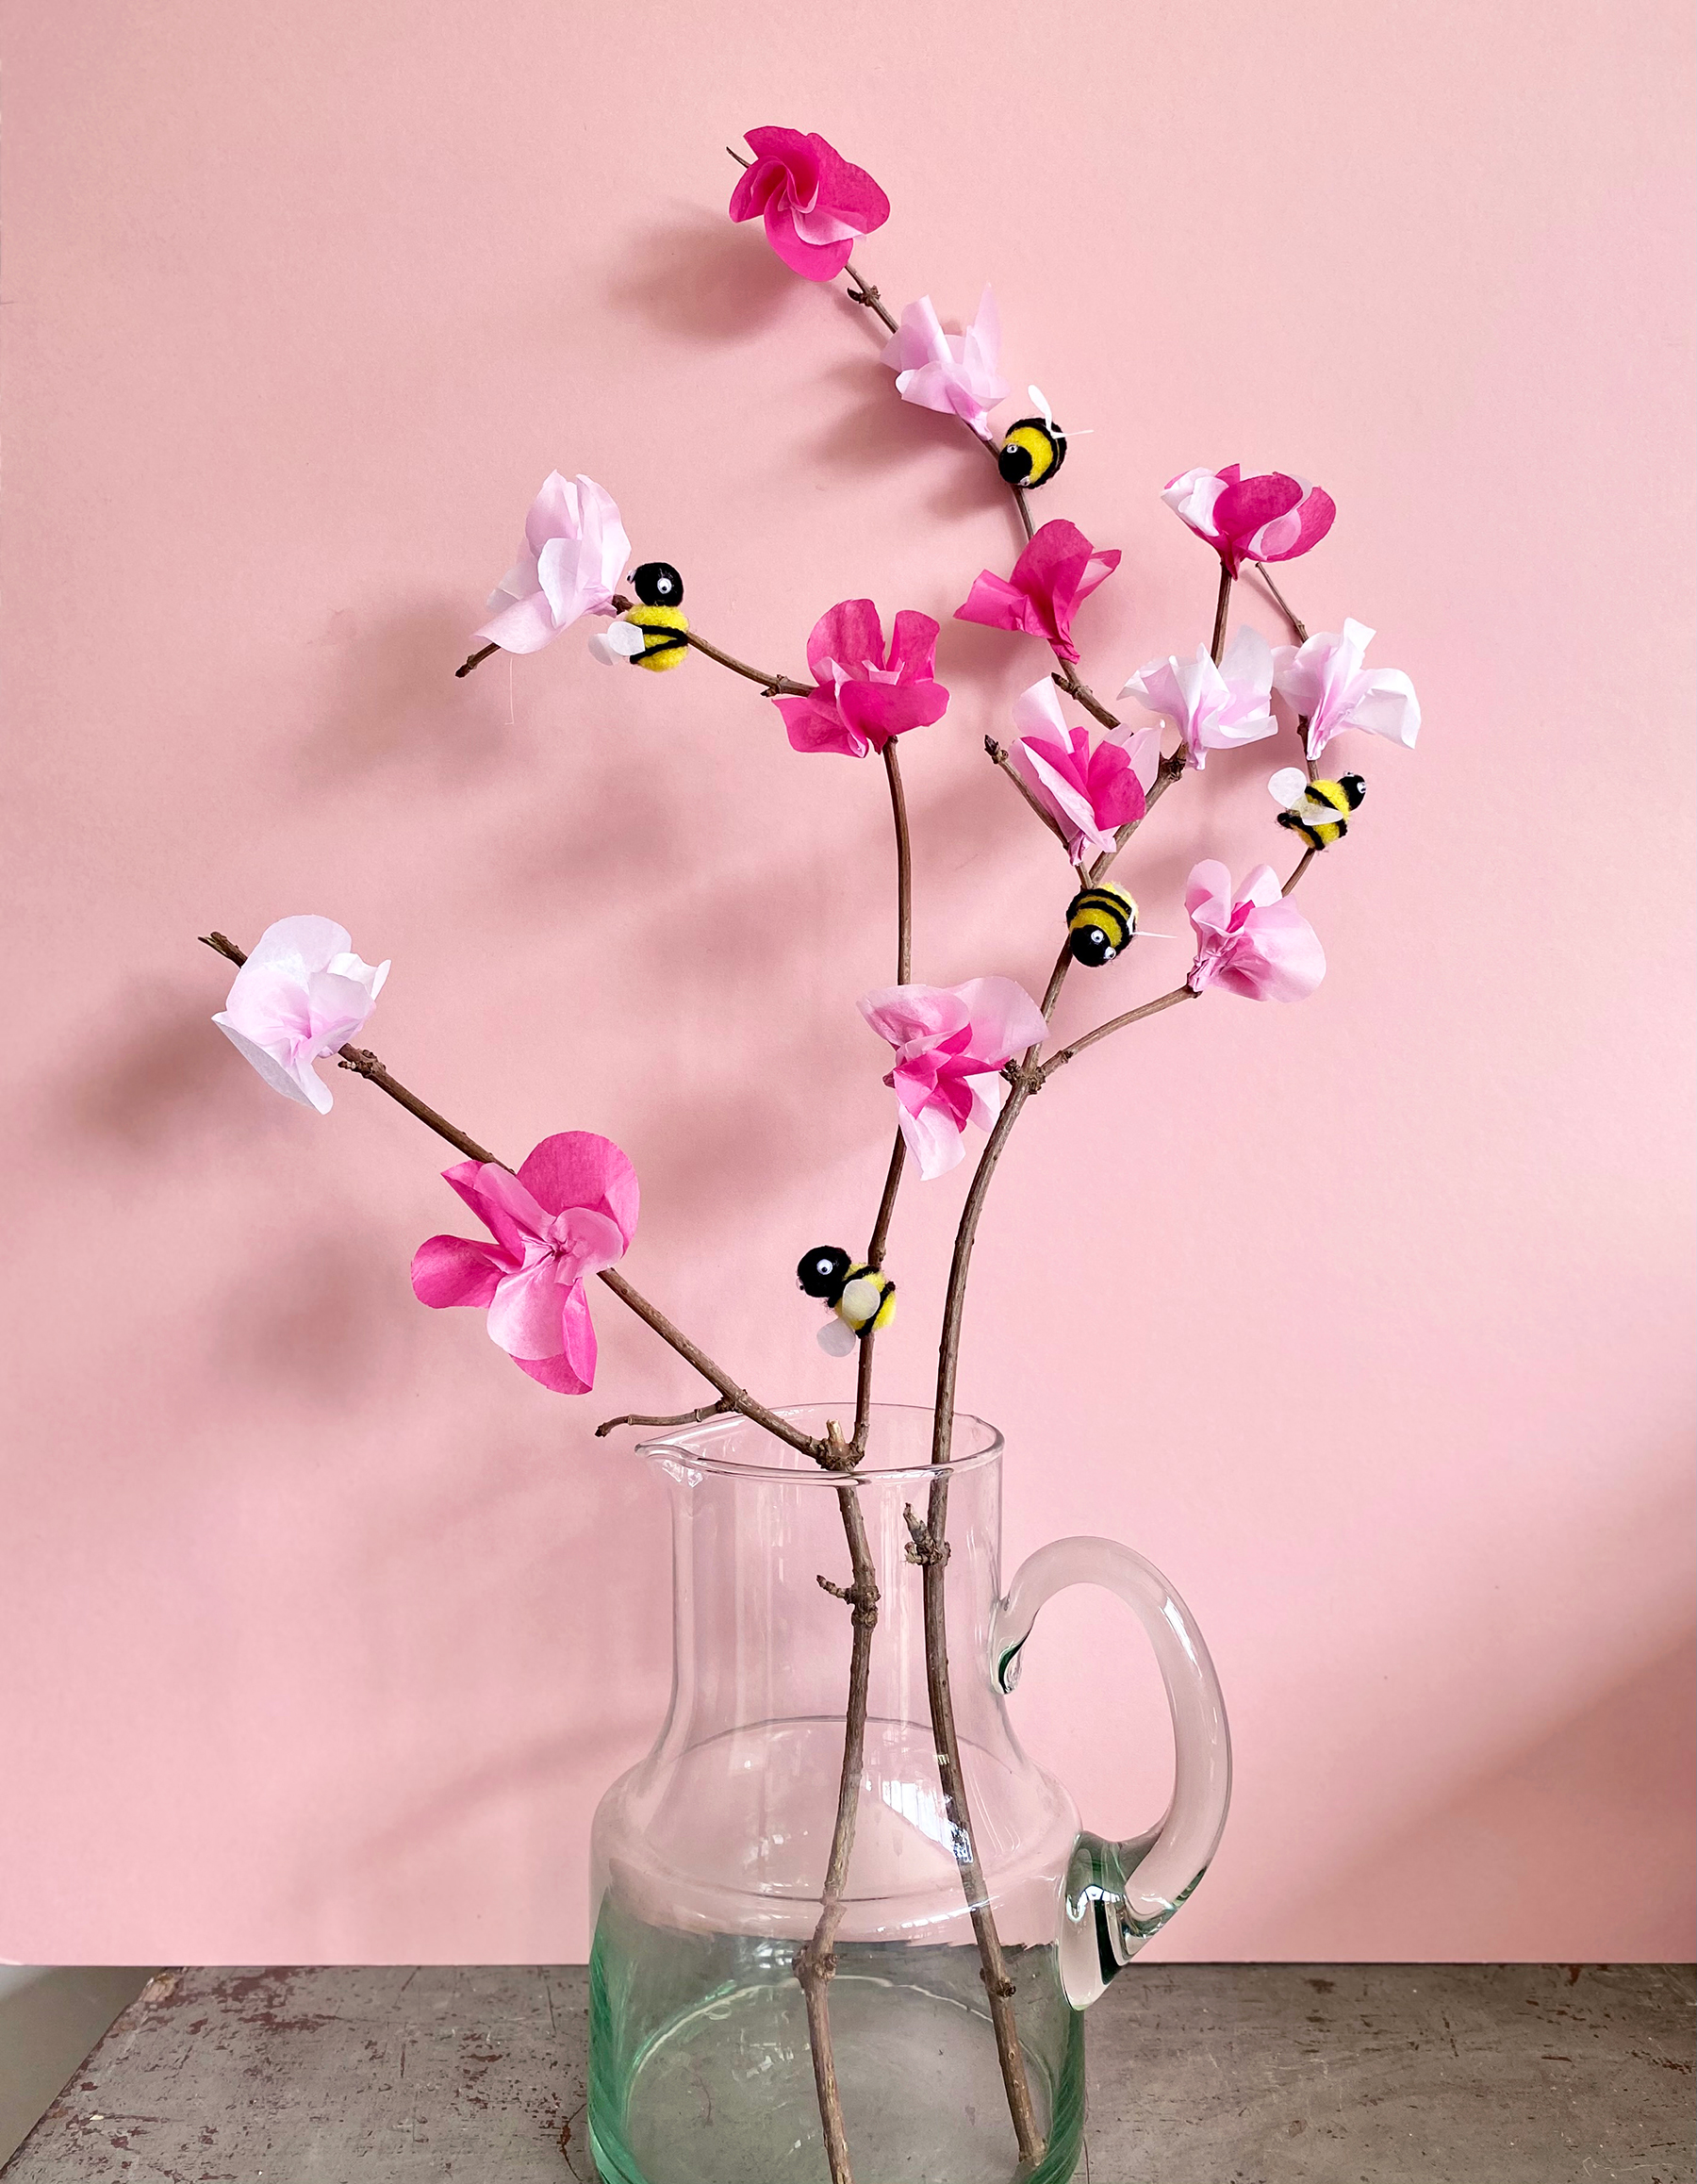 Photo of homemade cherry blossom with pom pom bees in a clear jug against a pale pink wall